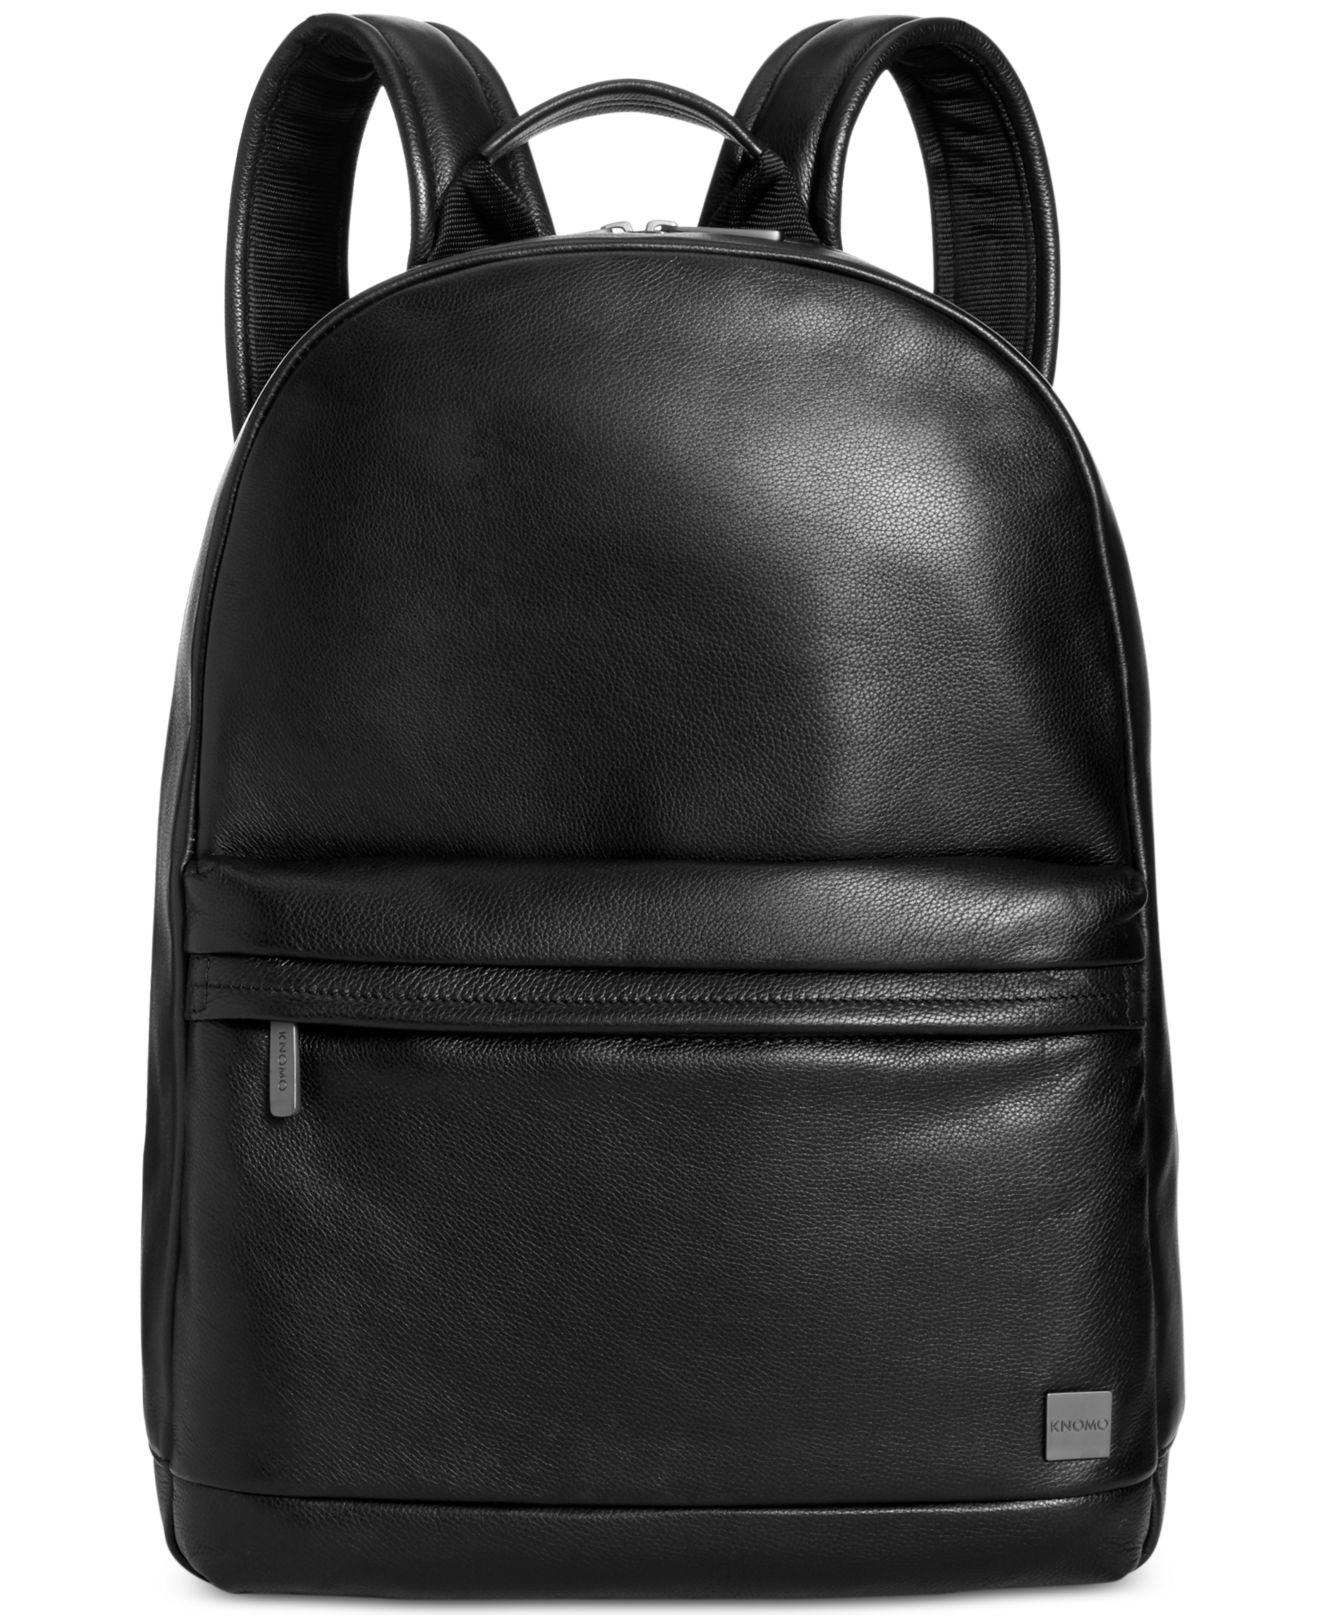 Lyst - Knomo Leather Laptop Backpack in Black